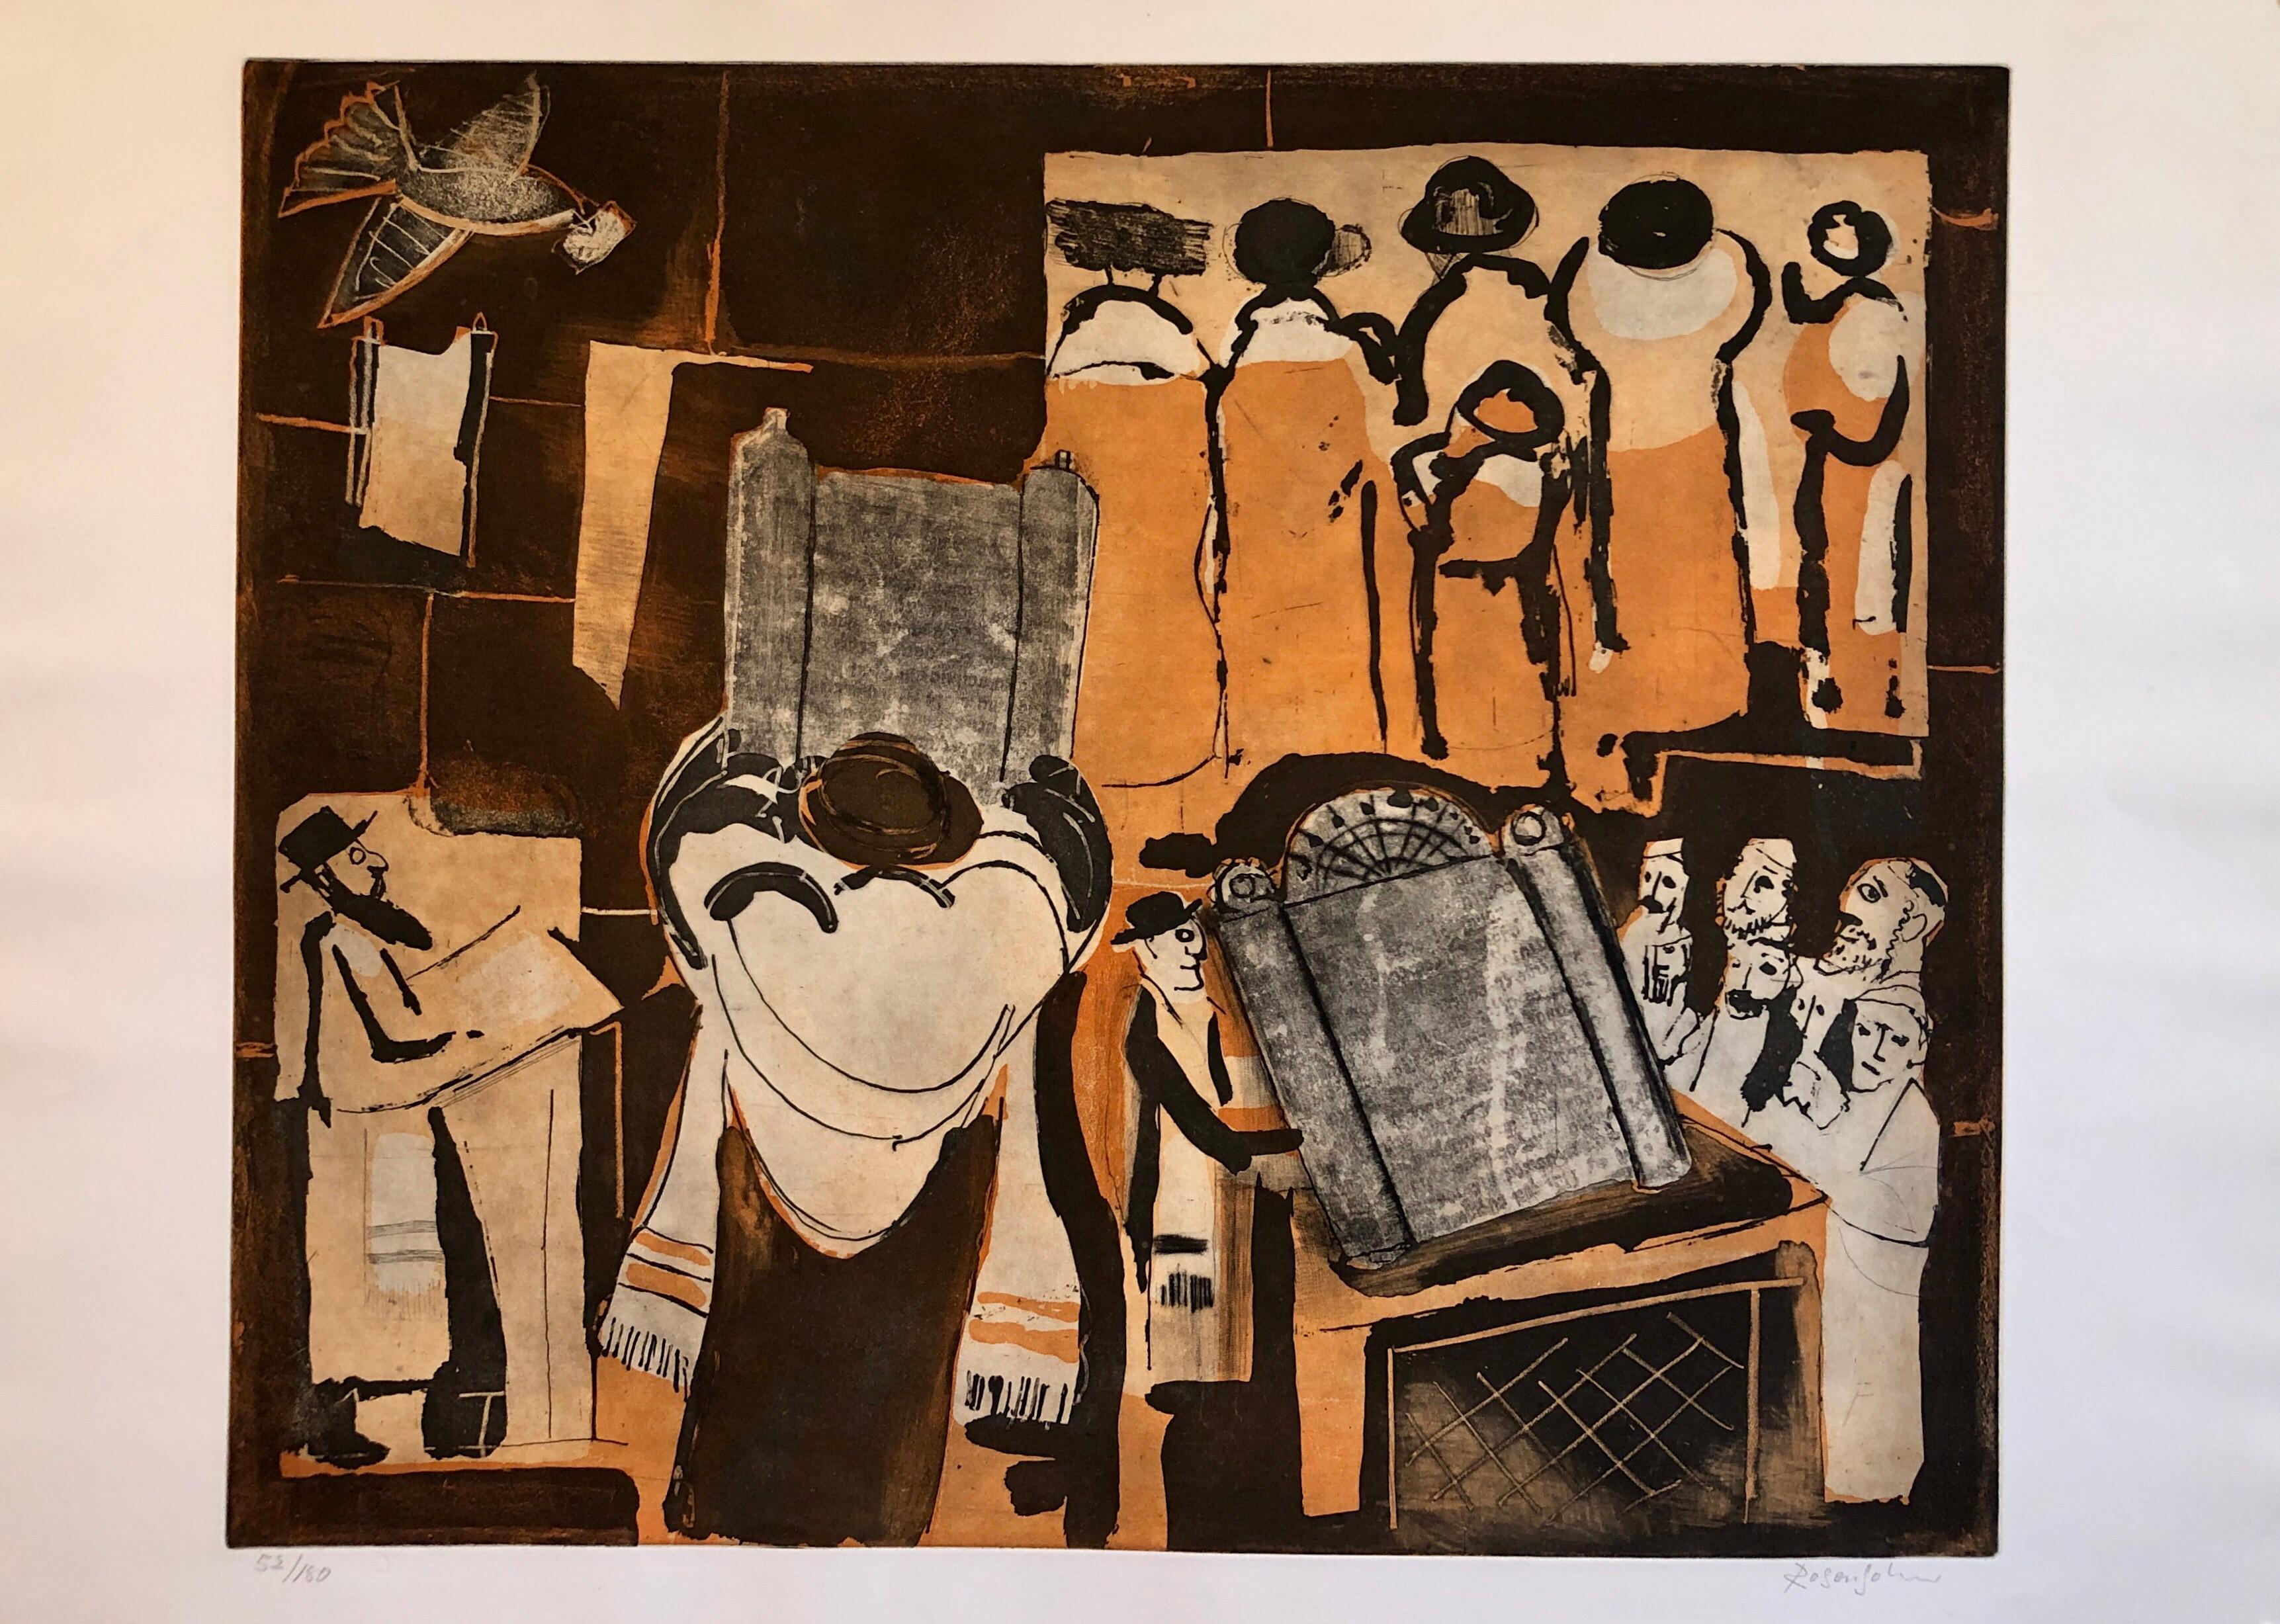 Swedish Jewish modern art. On Hahnemuhle paper, hand signed and numbered. poster is not included.
These depict synagogue interiors, Rabbis at prayer etc. Judaic religious events. This one depicts a Kosher meat butcher.
Mauritz Lennart Rosensohn ,